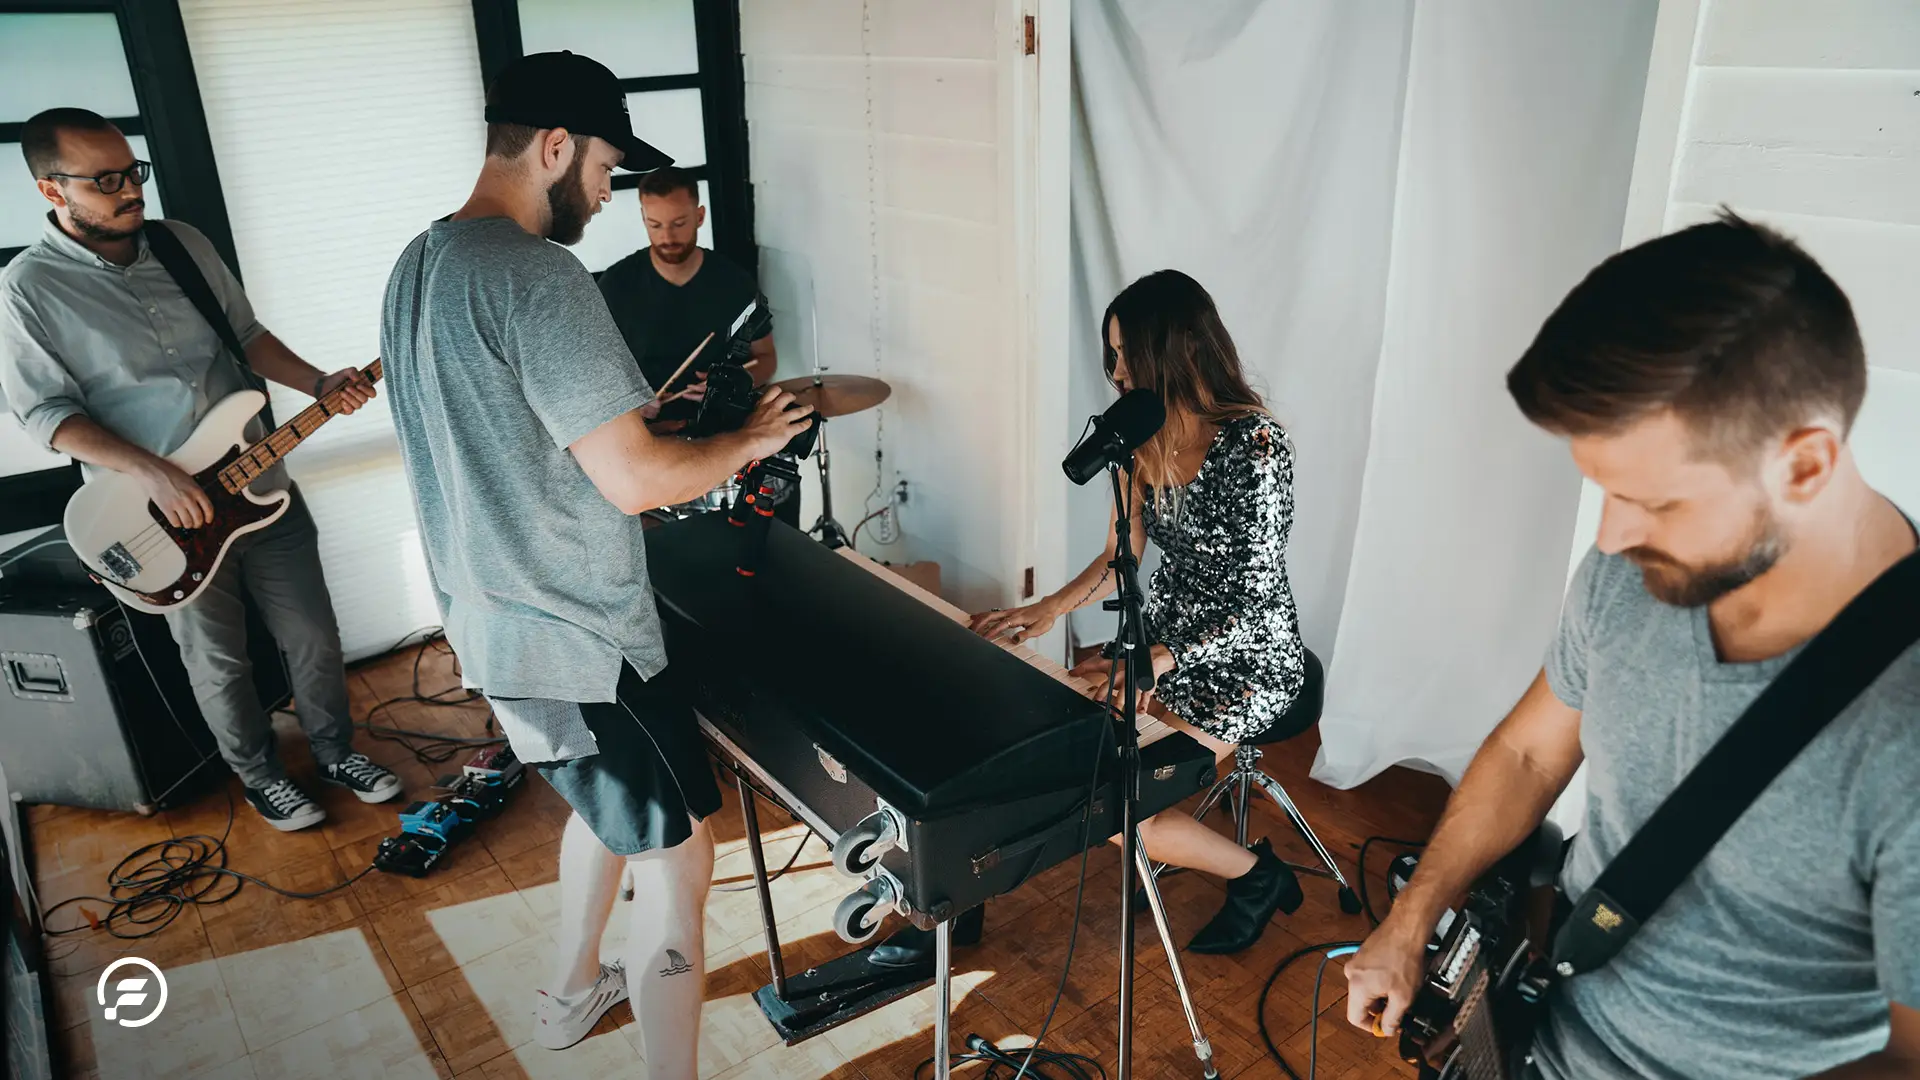 A band filming their own music video.